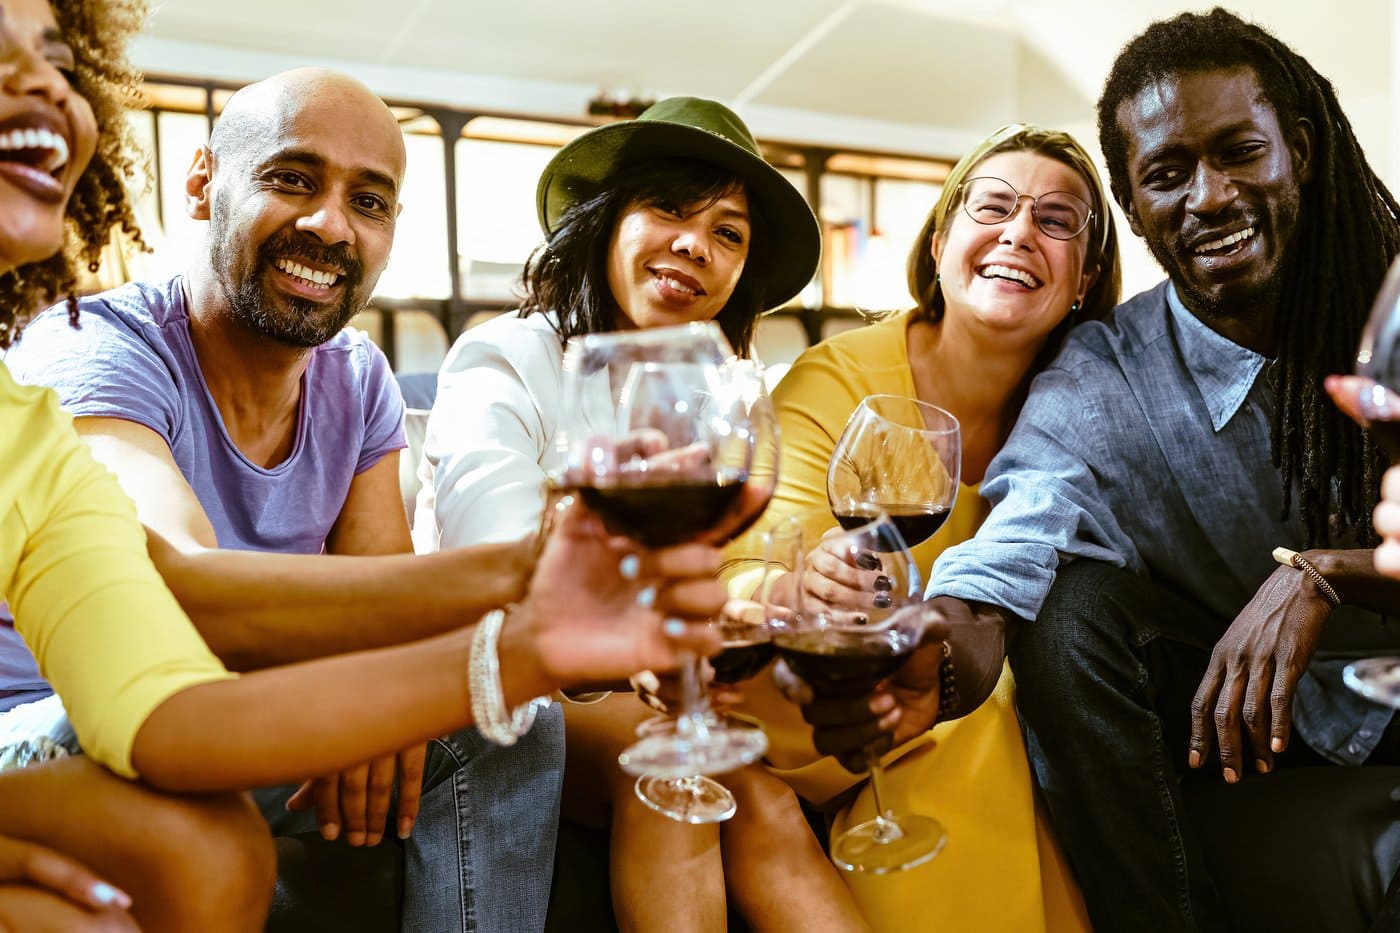 How to make friends: Gen X friends hanging out and drinking wine